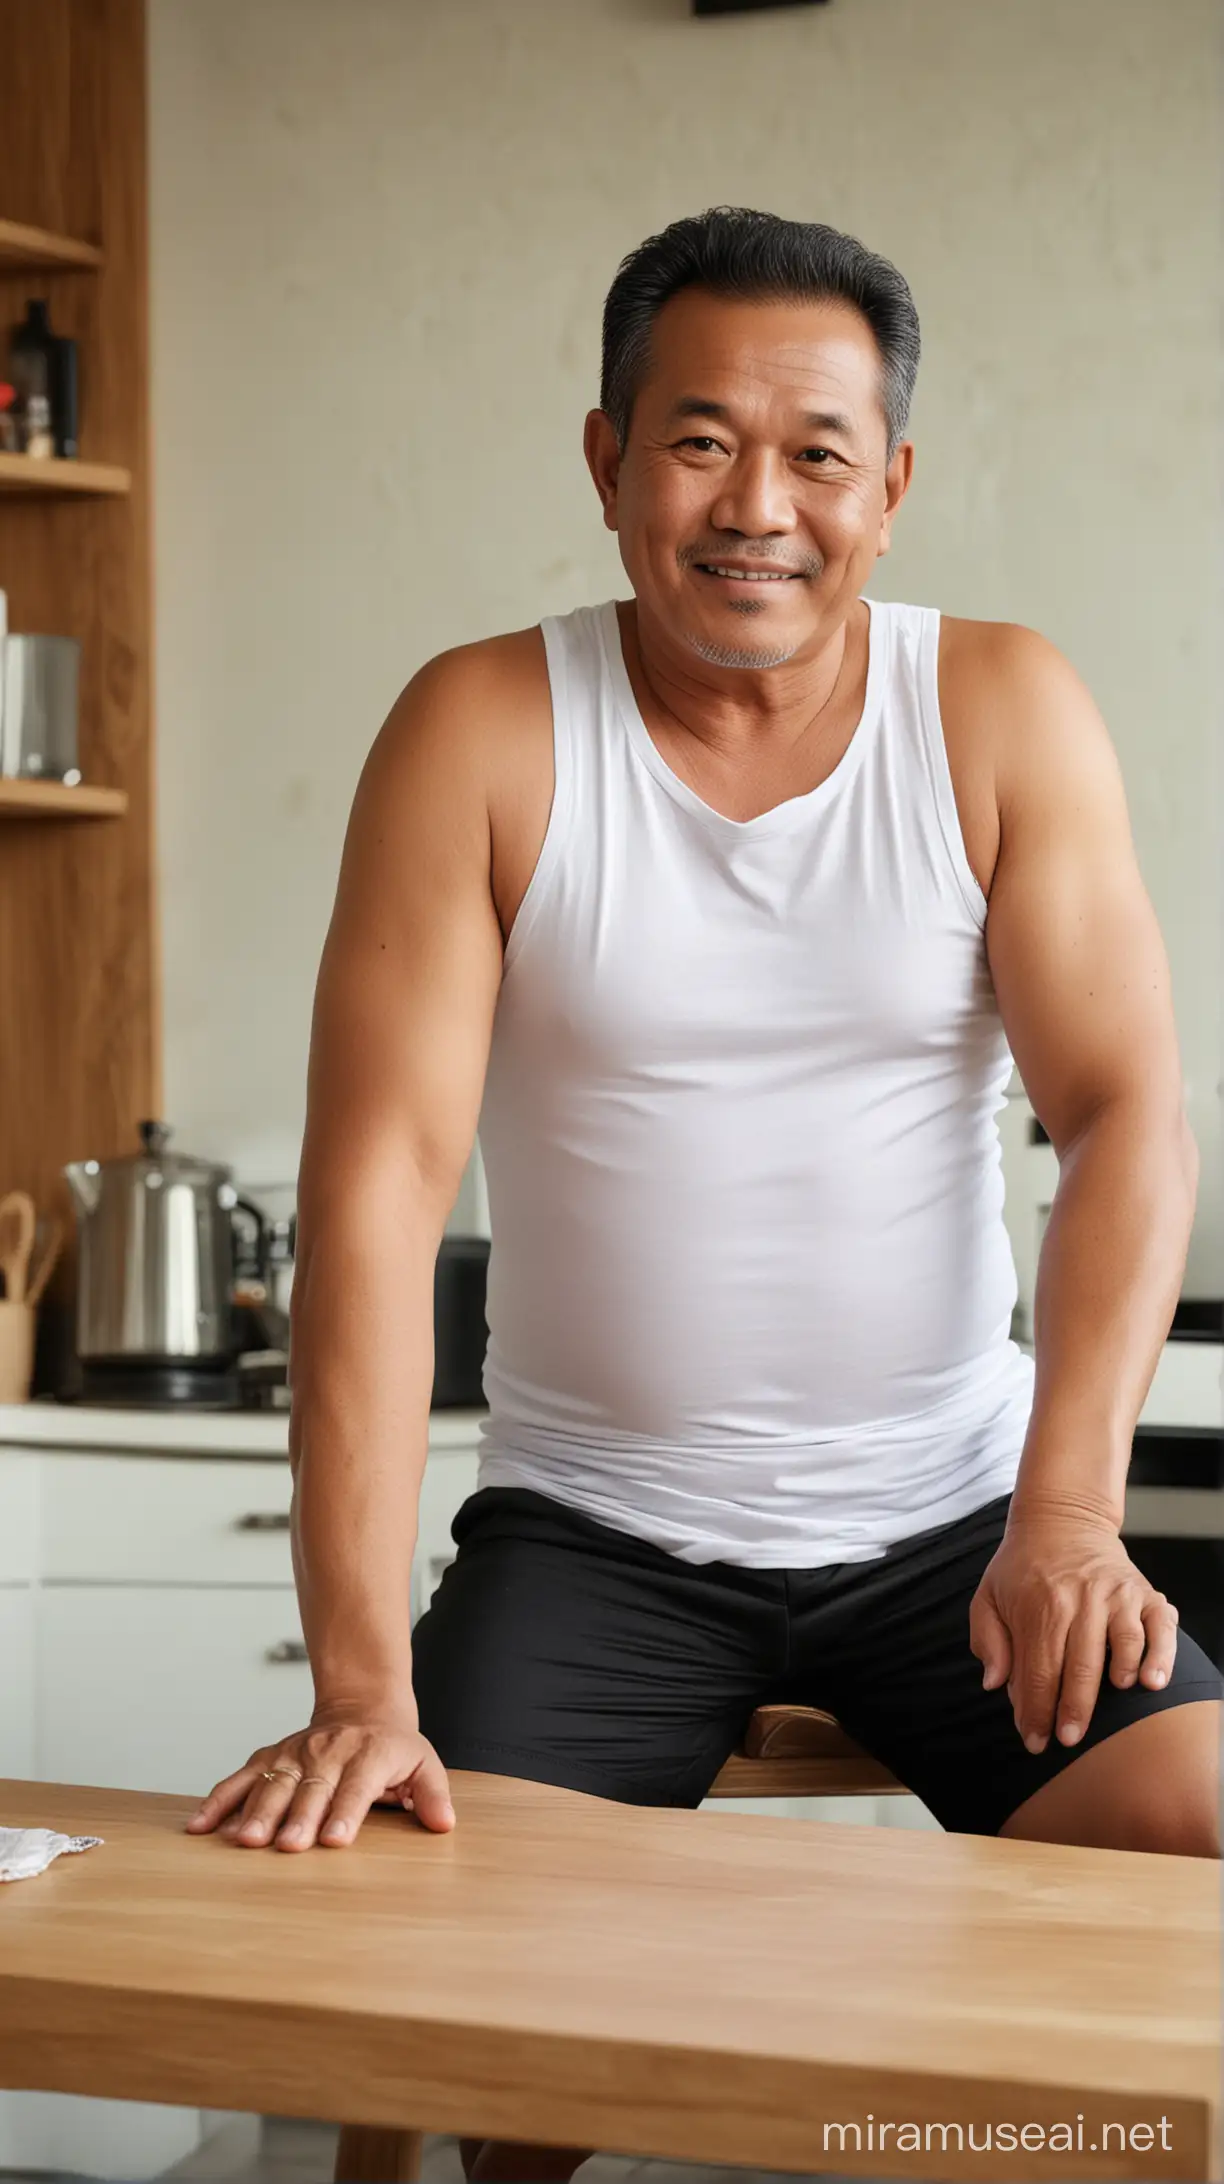 Mature Indonesian Man Relaxing in Kitchen Environment